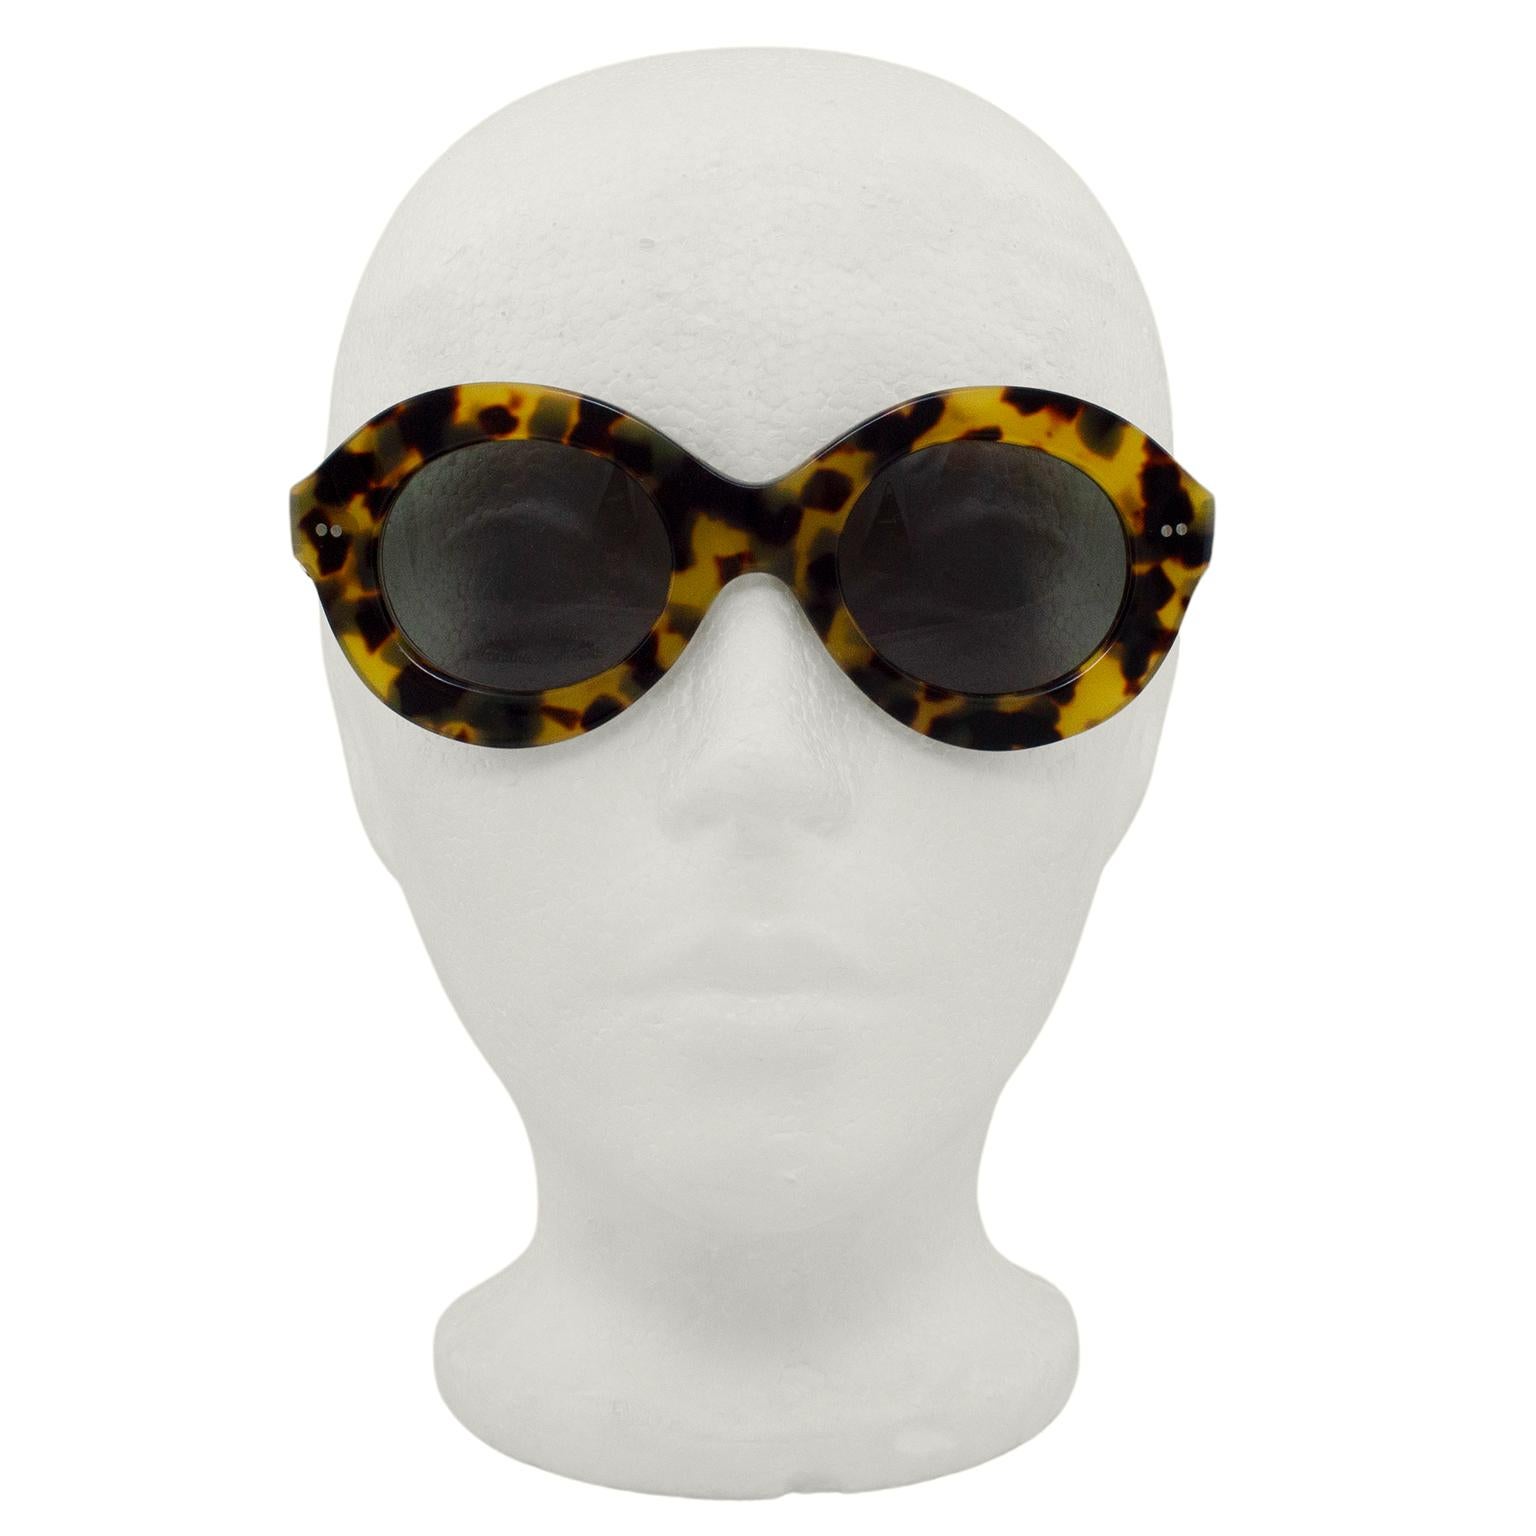 1990s Cutler and Gross Tortoiseshell Sunglasses  In Good Condition For Sale In Toronto, Ontario